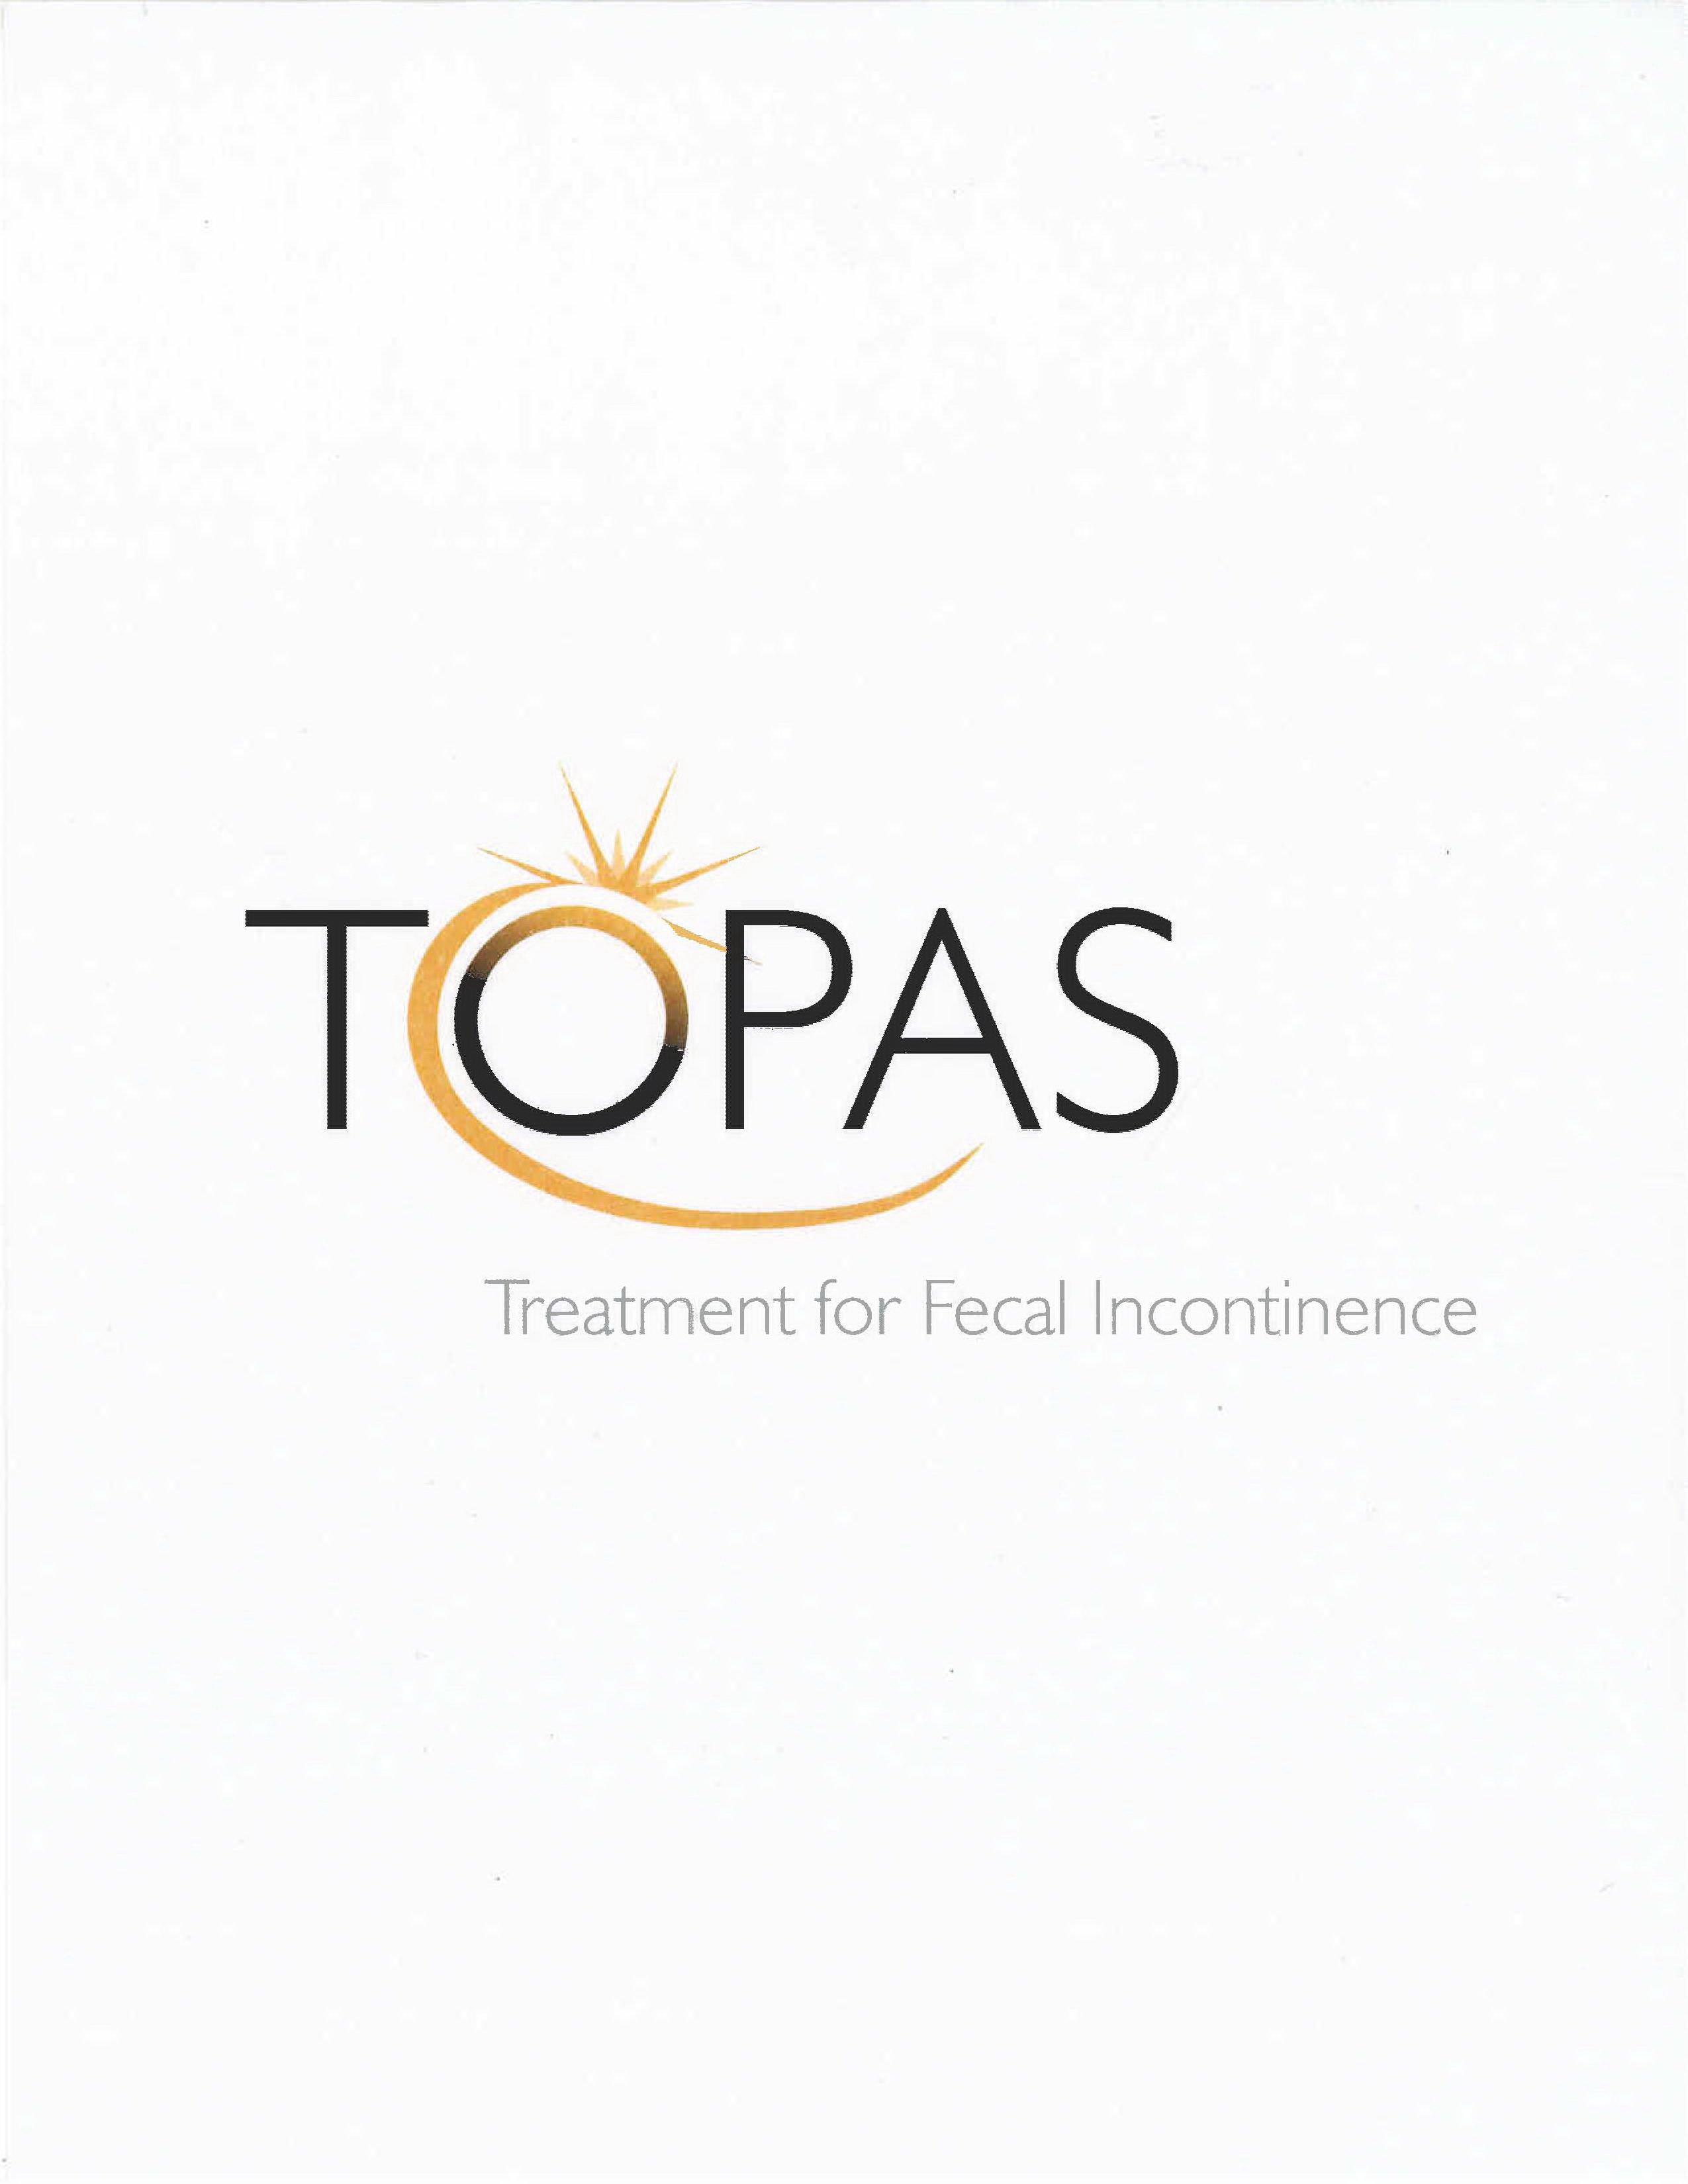  TOPAS TREATMENT FOR FECAL INCONTINENCE